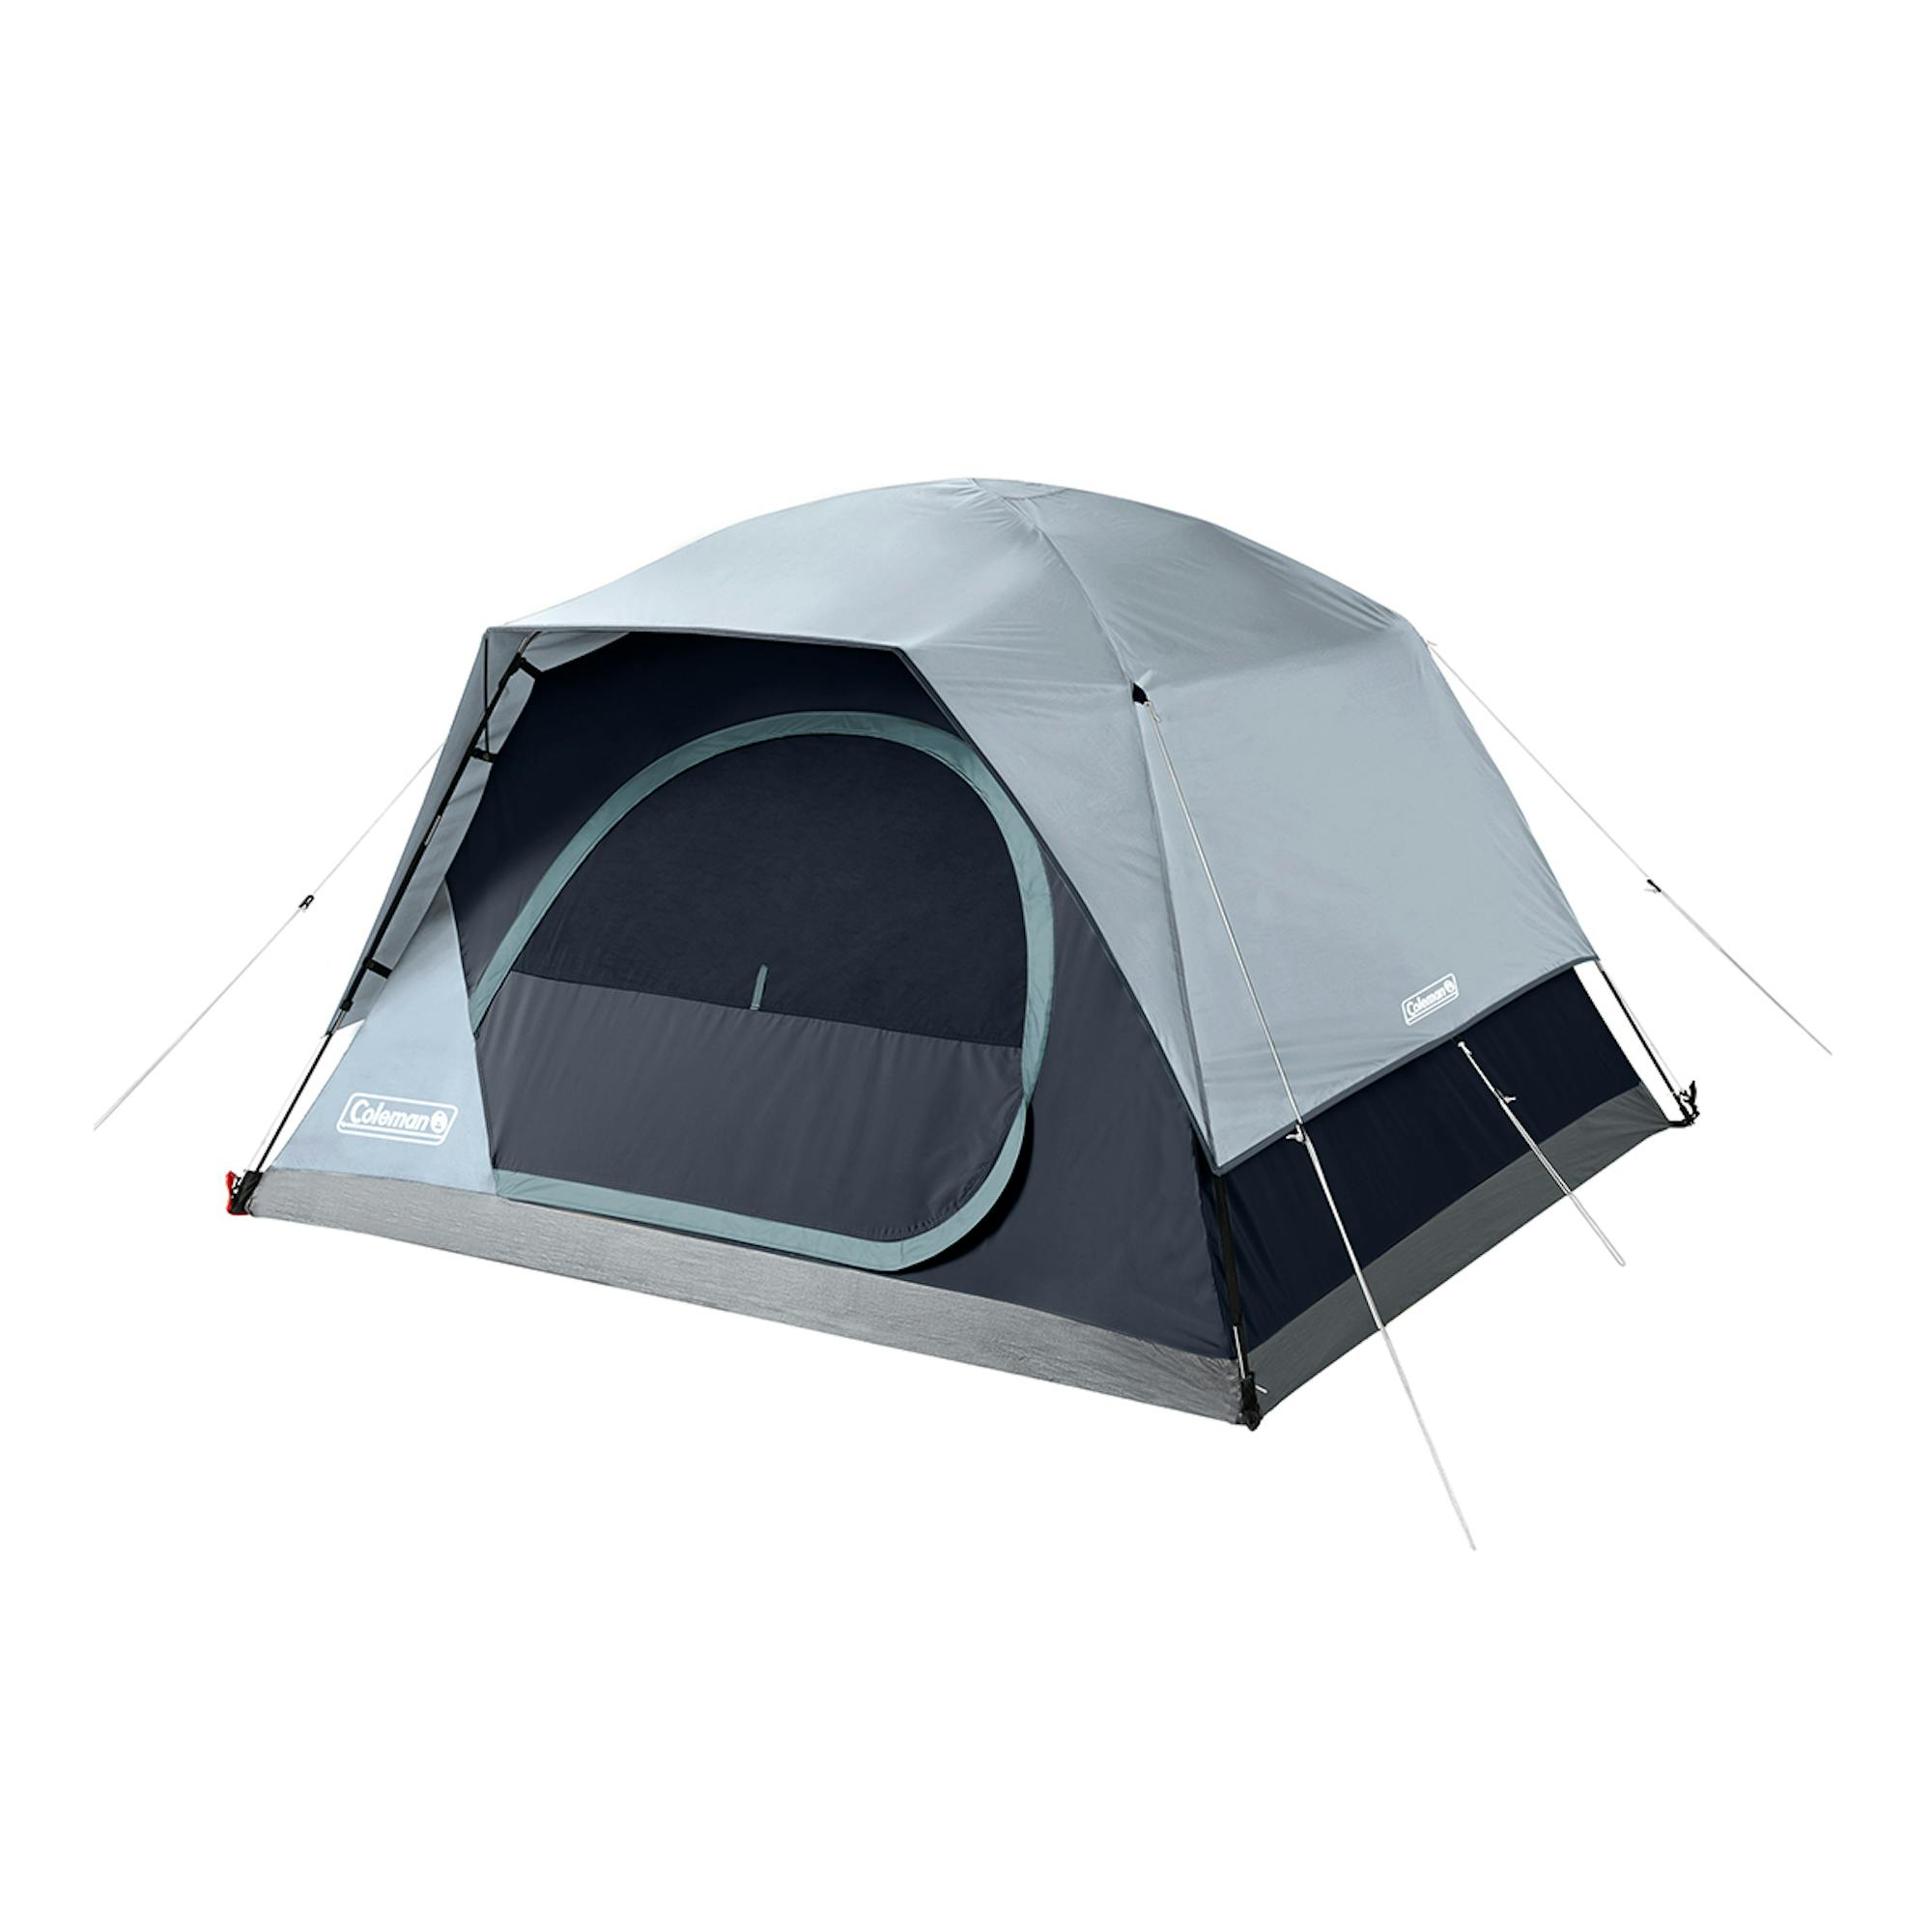 Skydome™ 4-Person Camping Tent with LED Lighting | Coleman